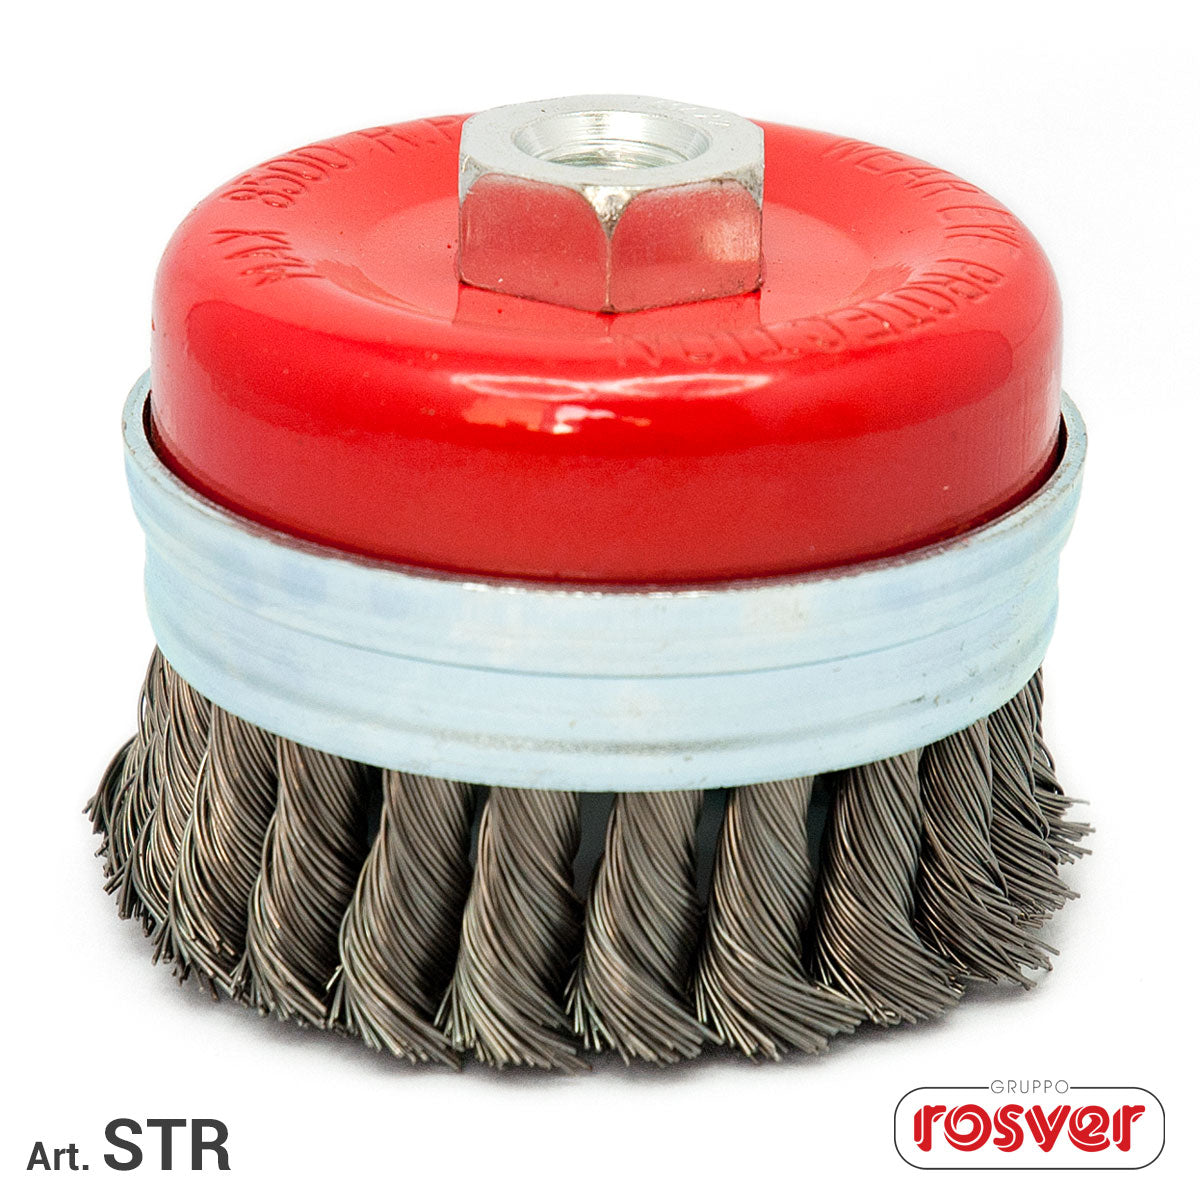 Twisted Knots Reinforced Cup Brush - Rosver - STR F.M14 Inox - Conf.1pz